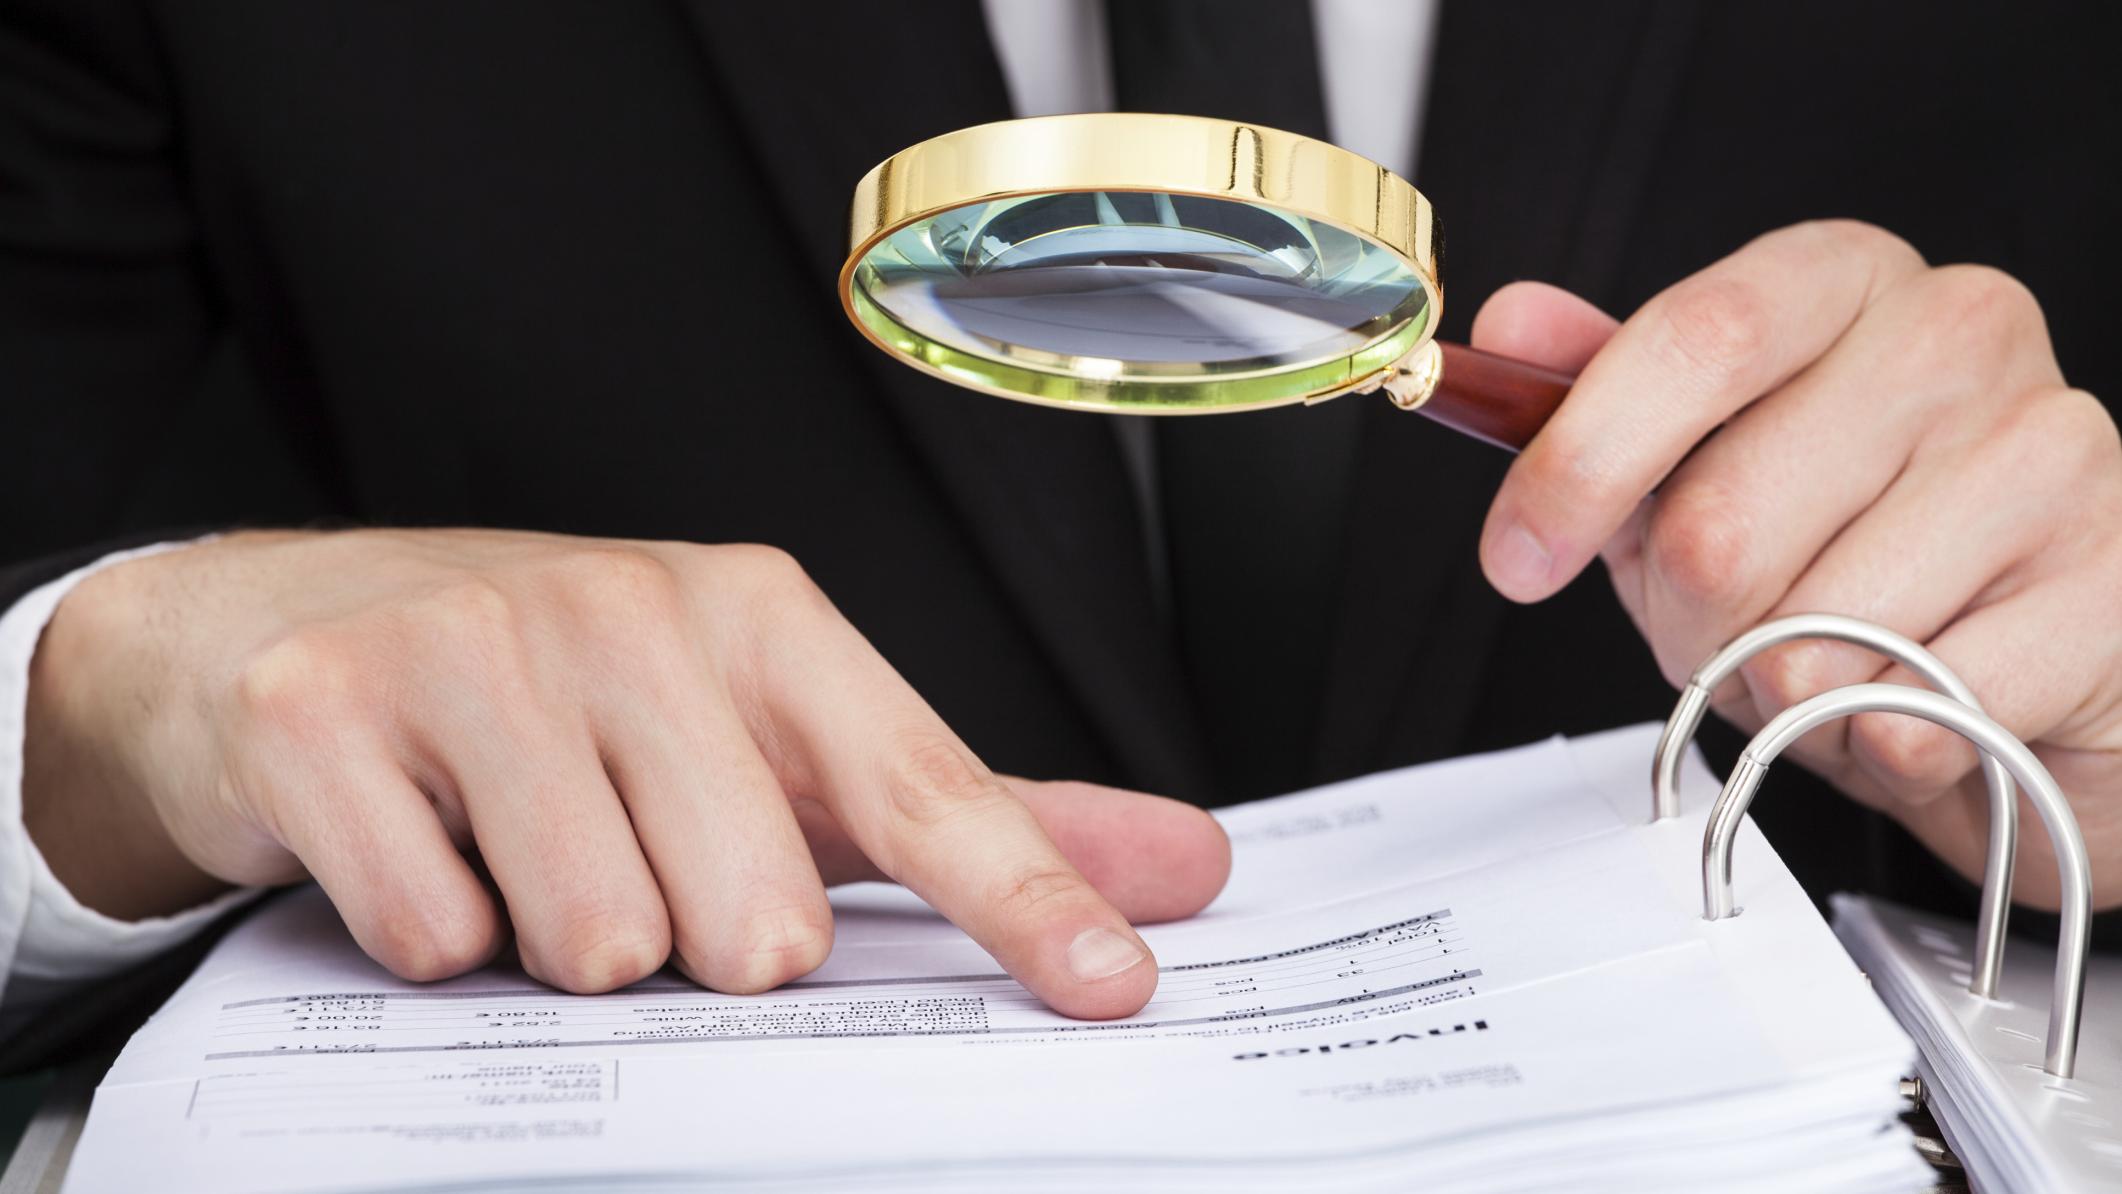 Photo of a man in a business suit using a magnifying glass, marking his place on a document with his right index finger.